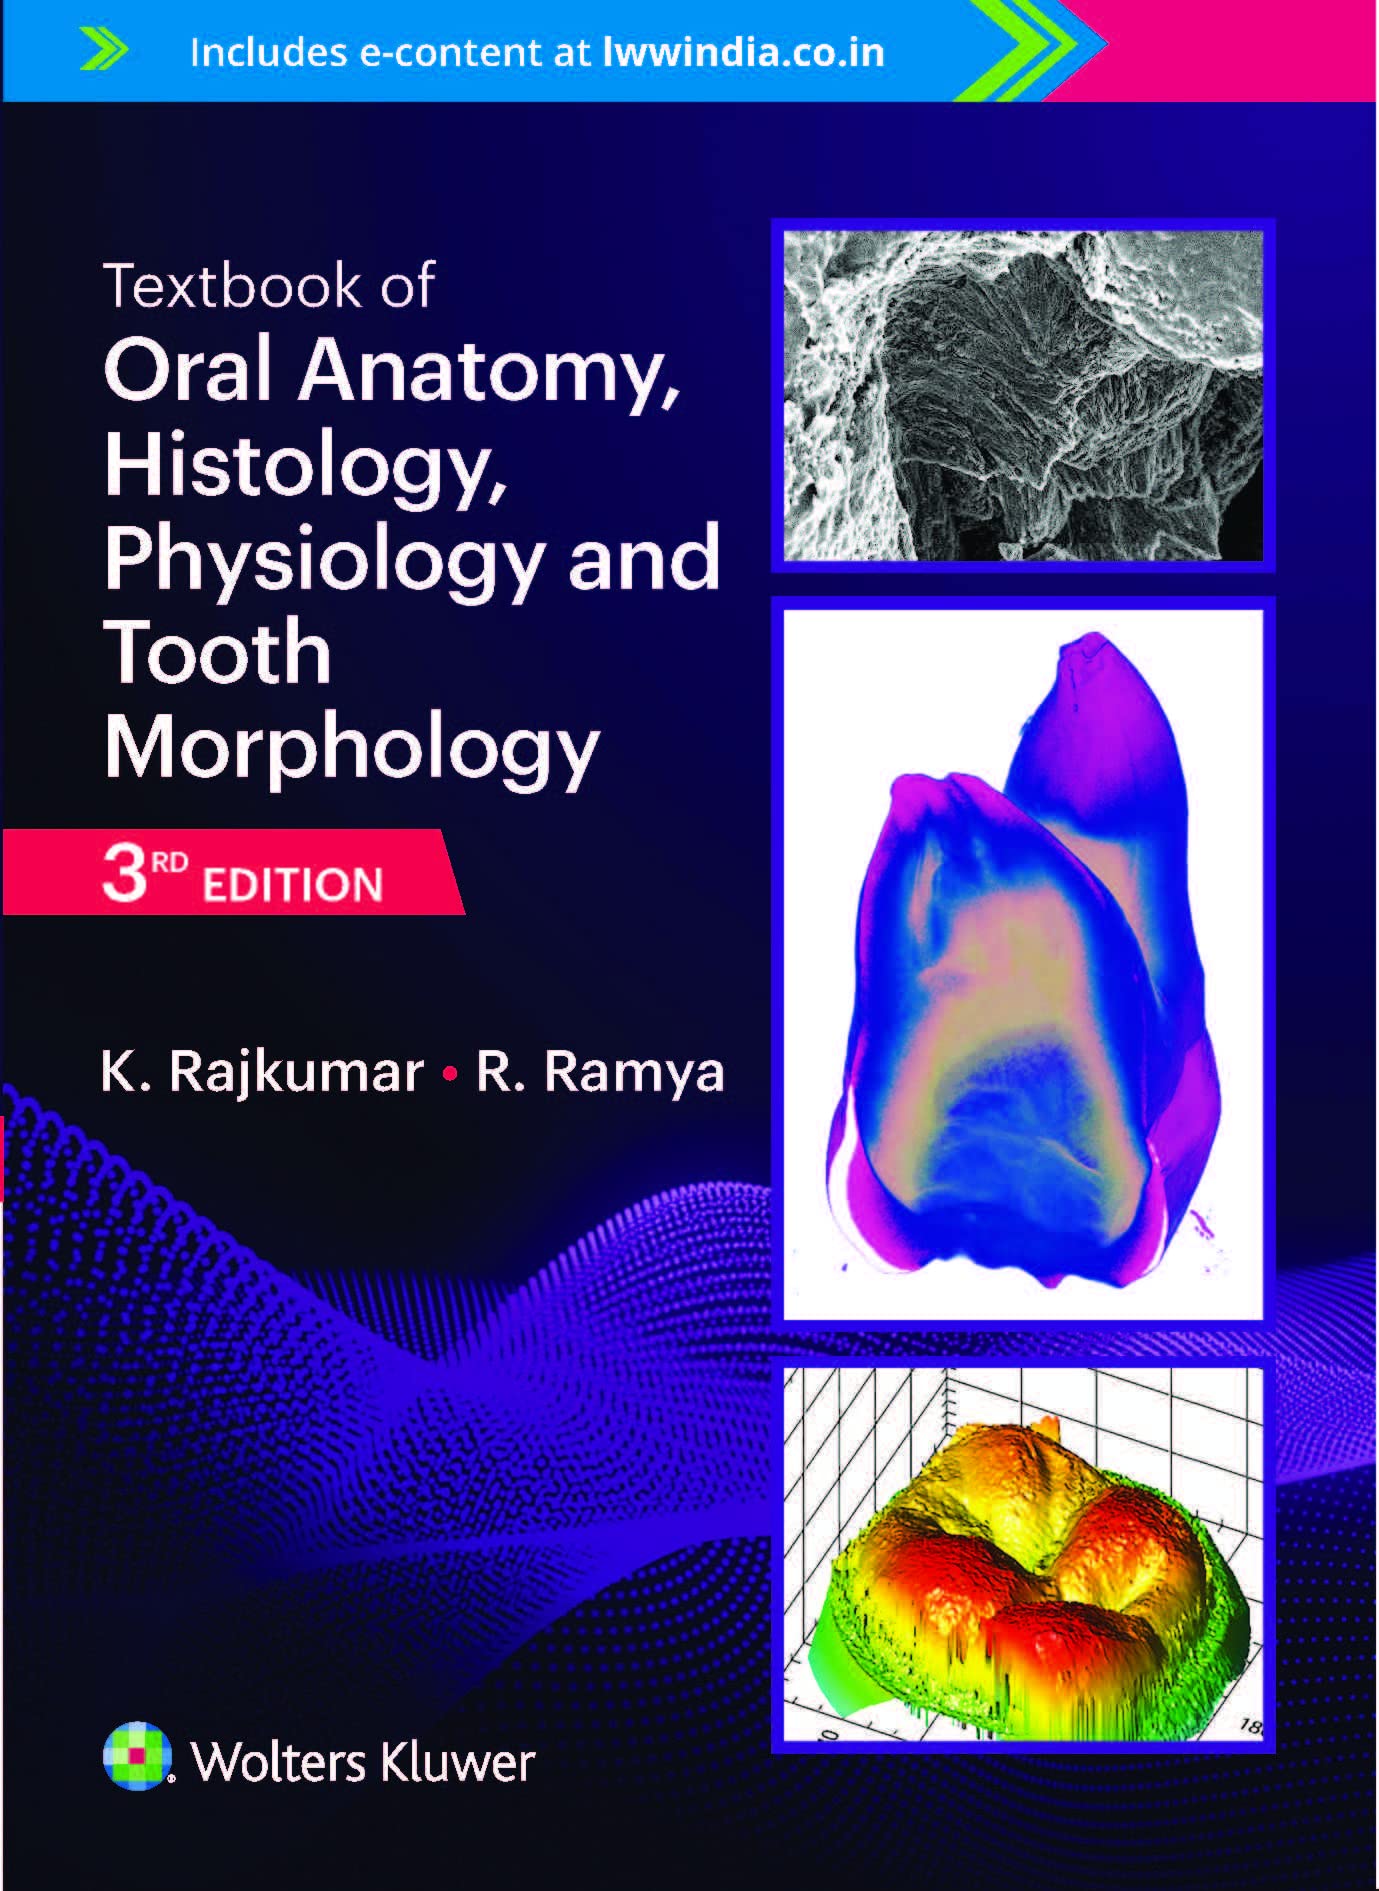 Textbook of Oral Anatomy, Histology, Physiologyand Tooth Morphology, 3rd edition